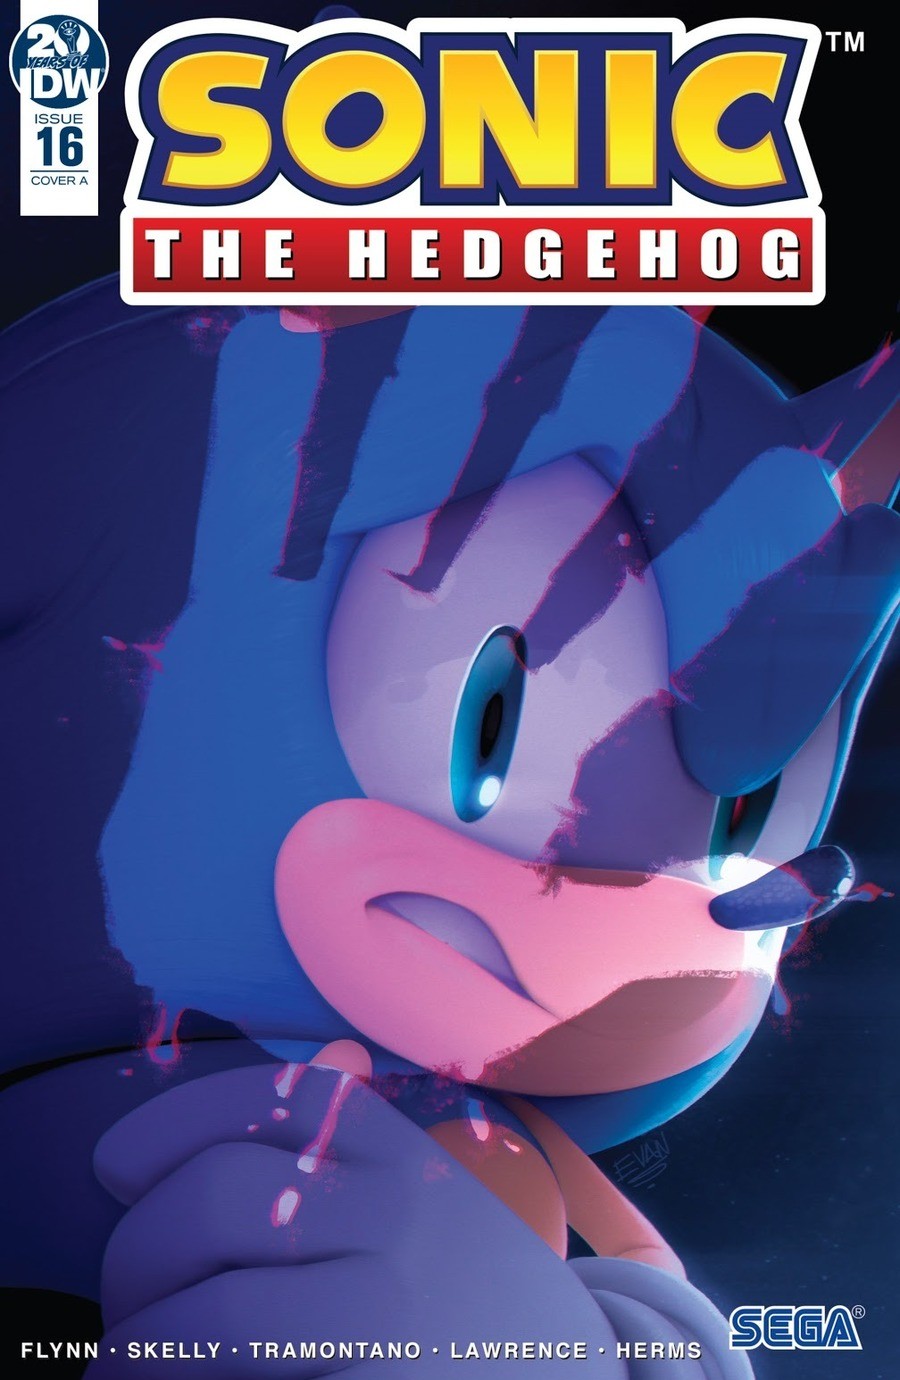 Sonic IDW #16. join list: SonicIDW (93 subs)Mention History Oh wow that was kinda horrifying. Oh wait you didn't read it yet? Well alright take you're time... For your memeing pleasure